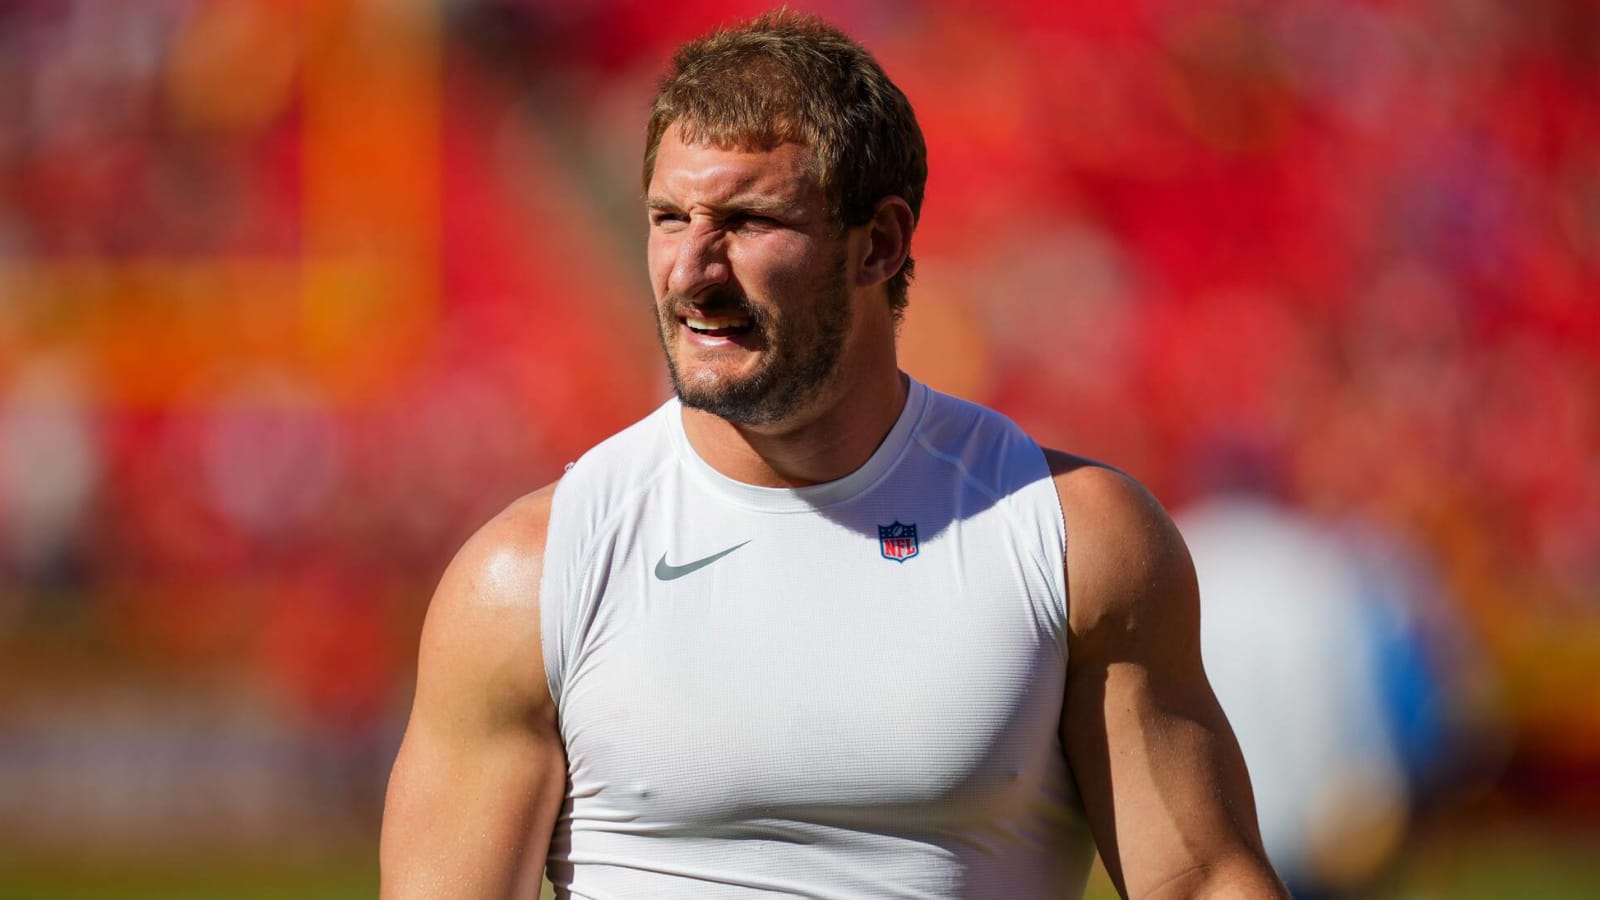 Joey Bosa seen crying after what looked like serious injury